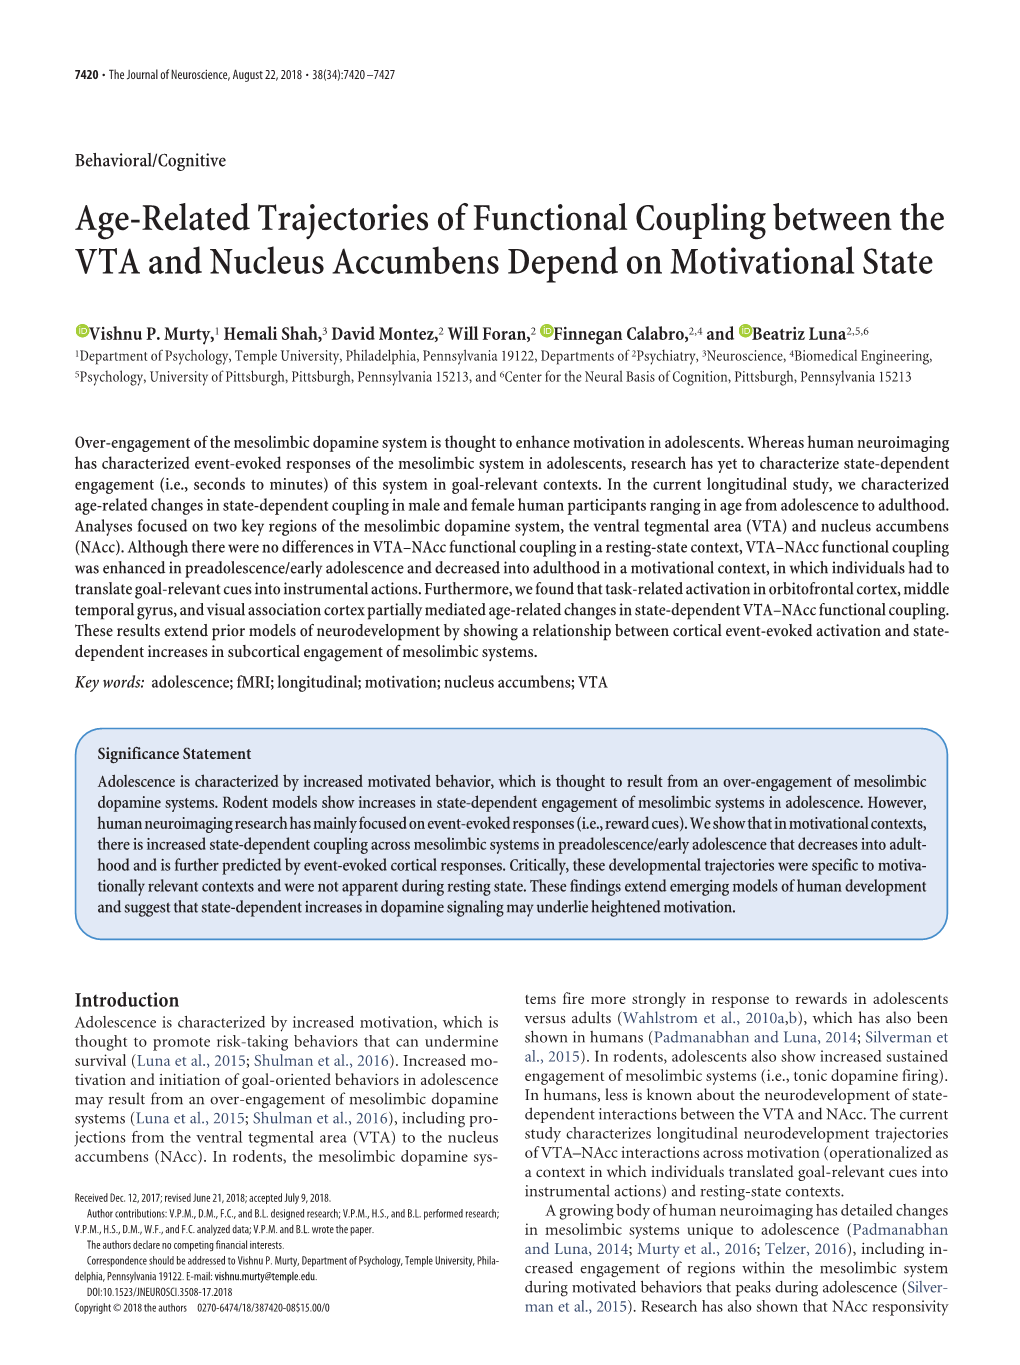 Age-Related Trajectories of Functional Coupling Between the VTA and Nucleus Accumbens Depend on Motivational State